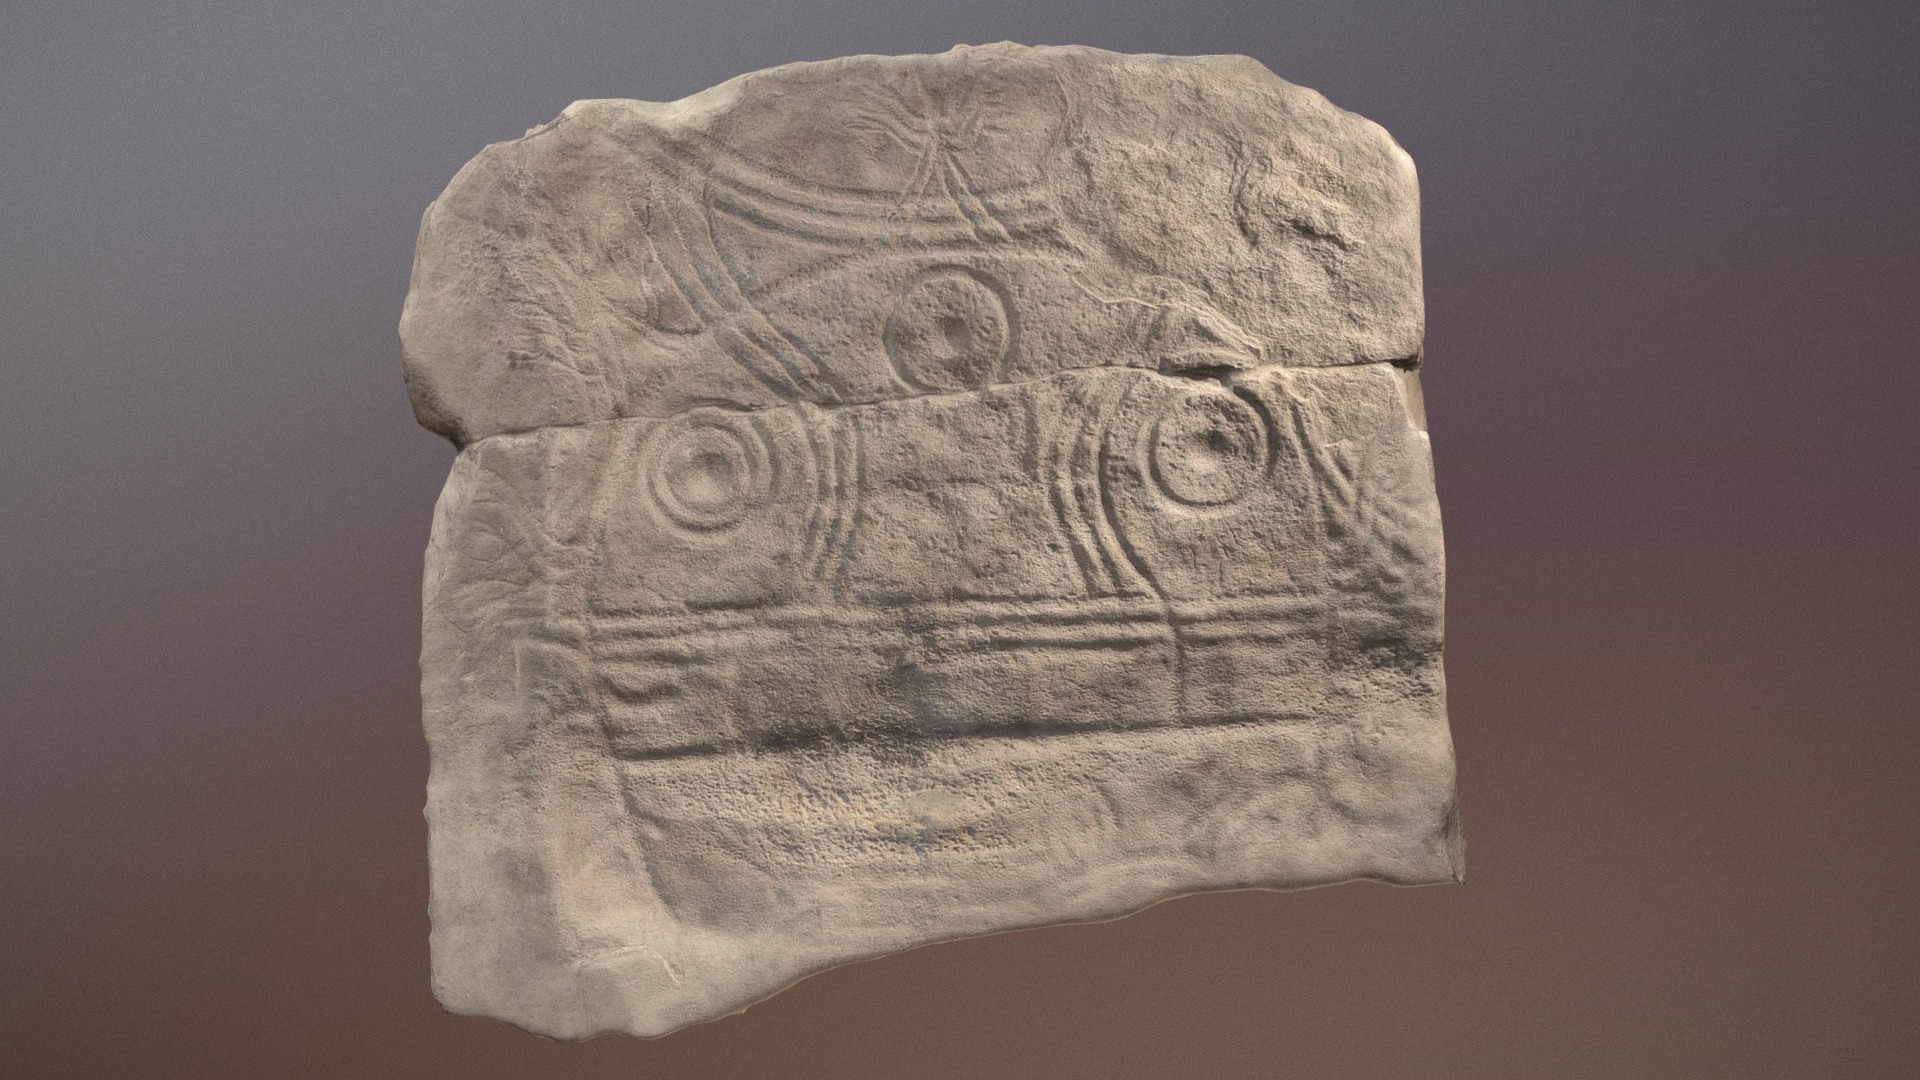 3D model Okunev stele - This is a 3D model of the Okunev stele. The 3D model is about a stone with writing on it.